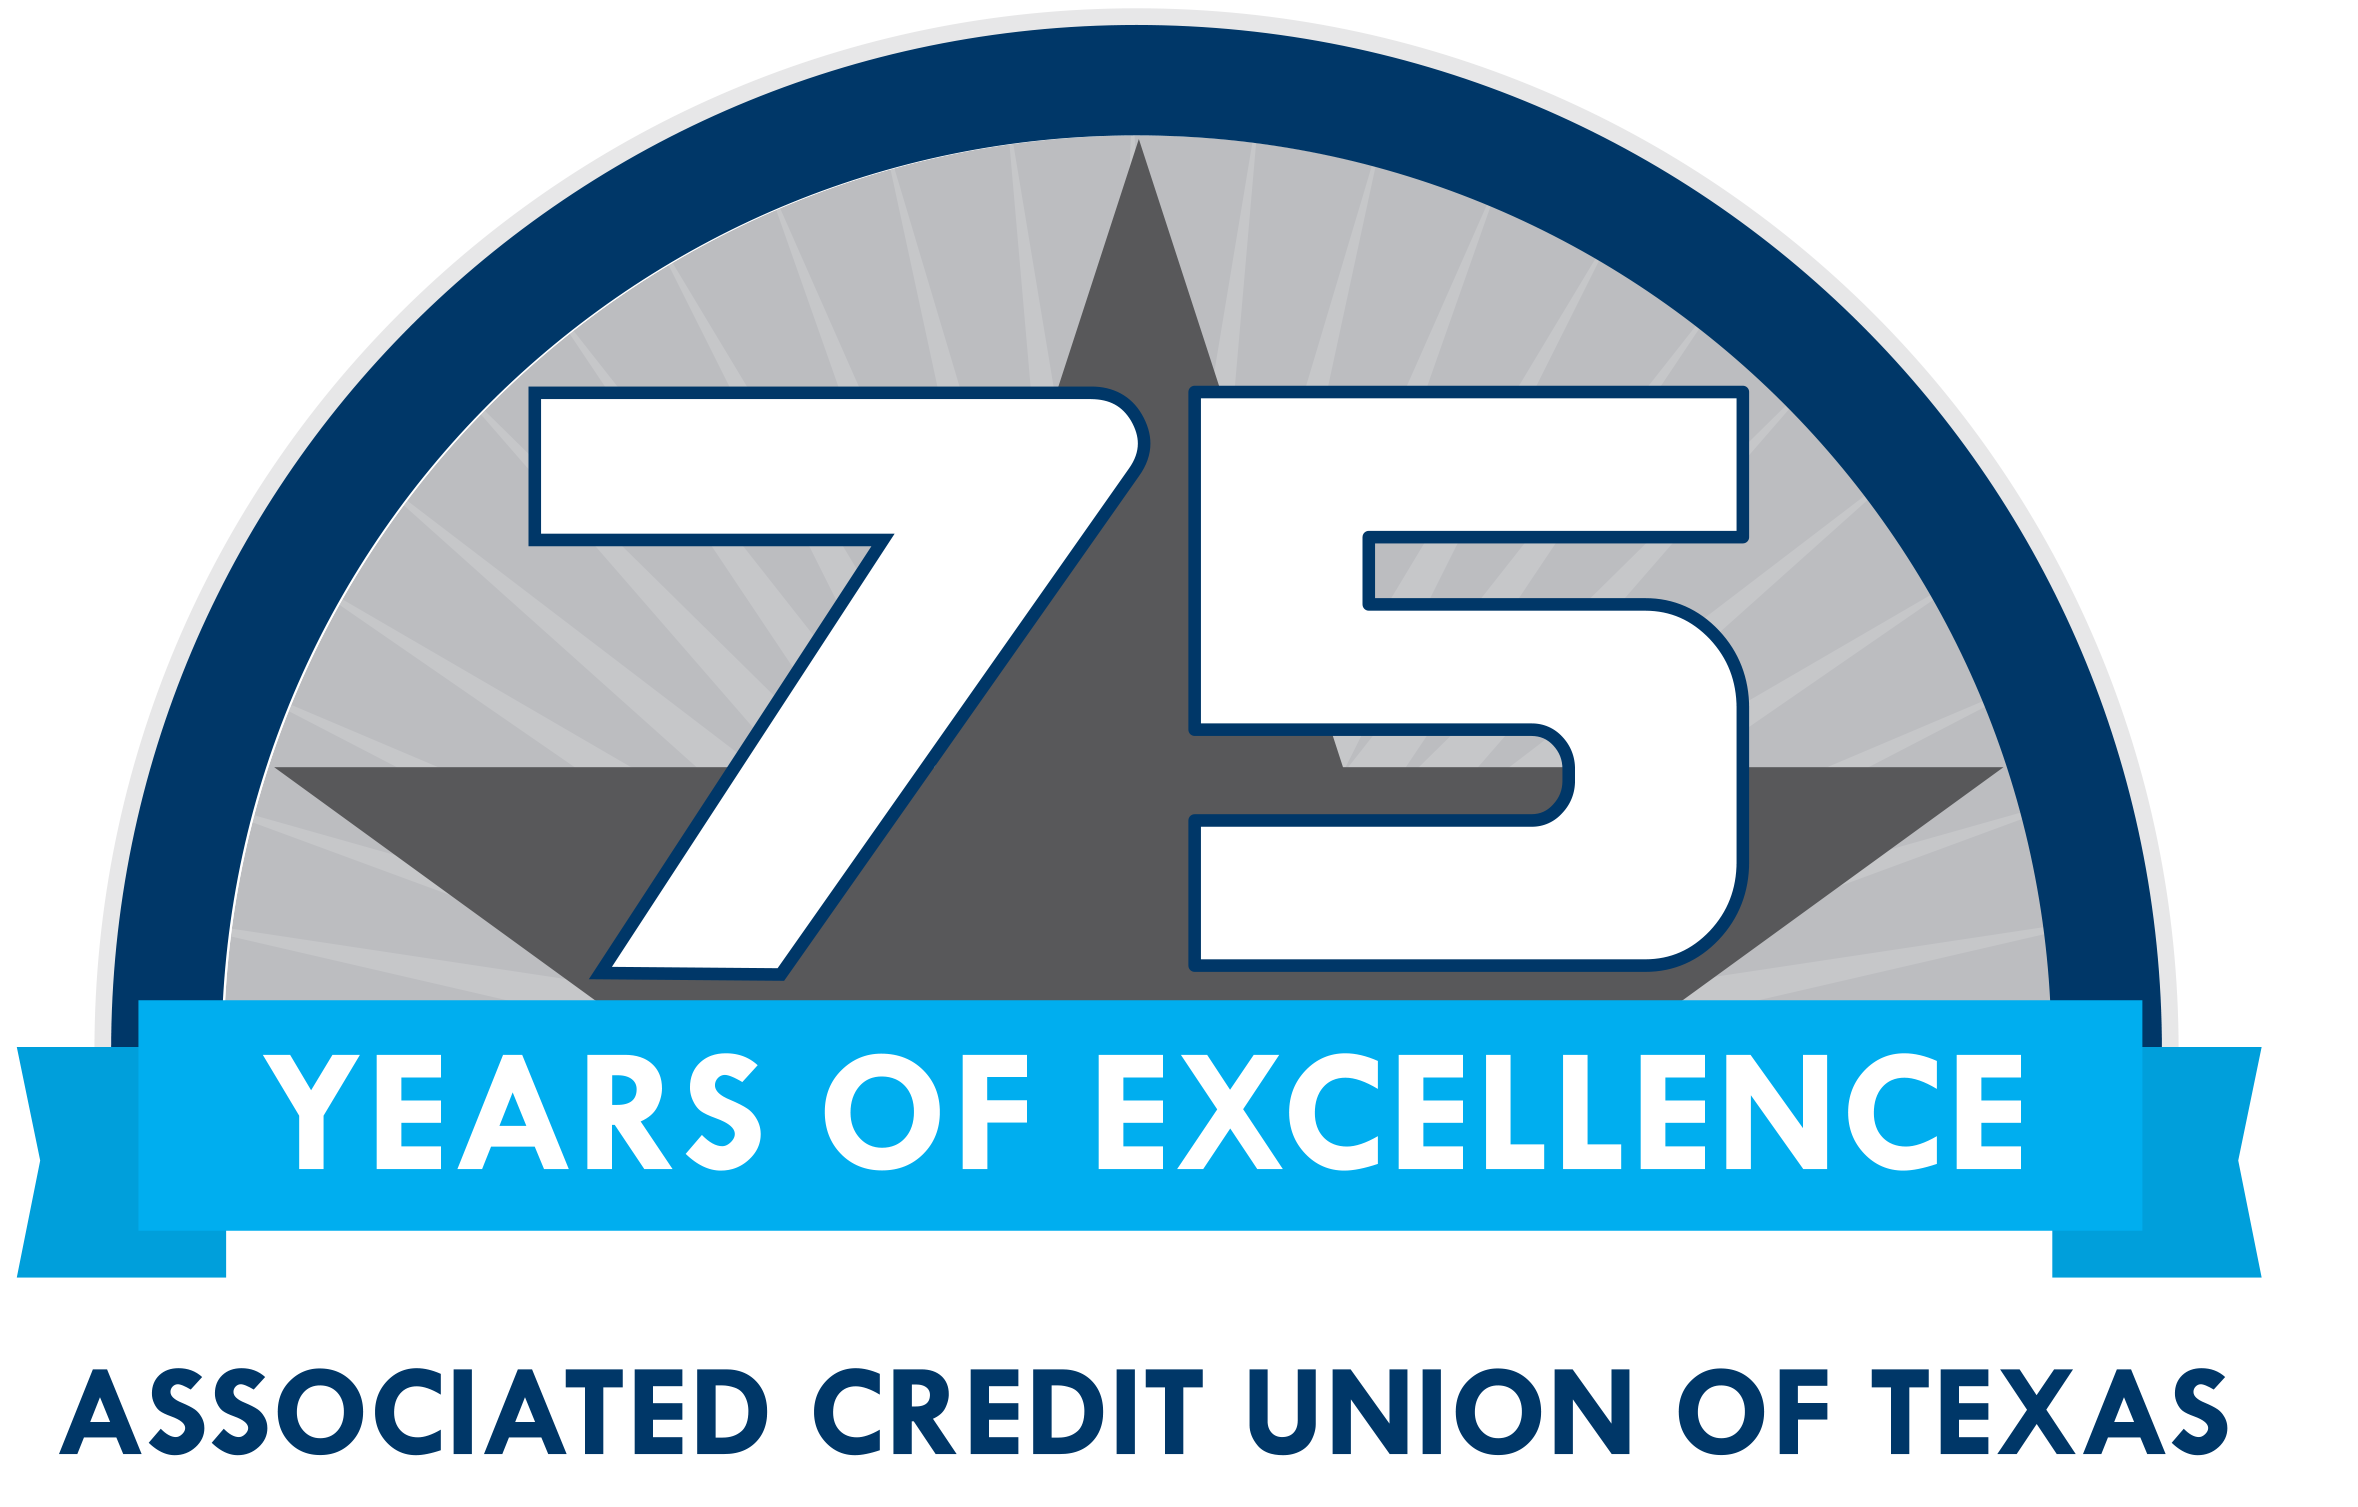 75 Years of Excellence